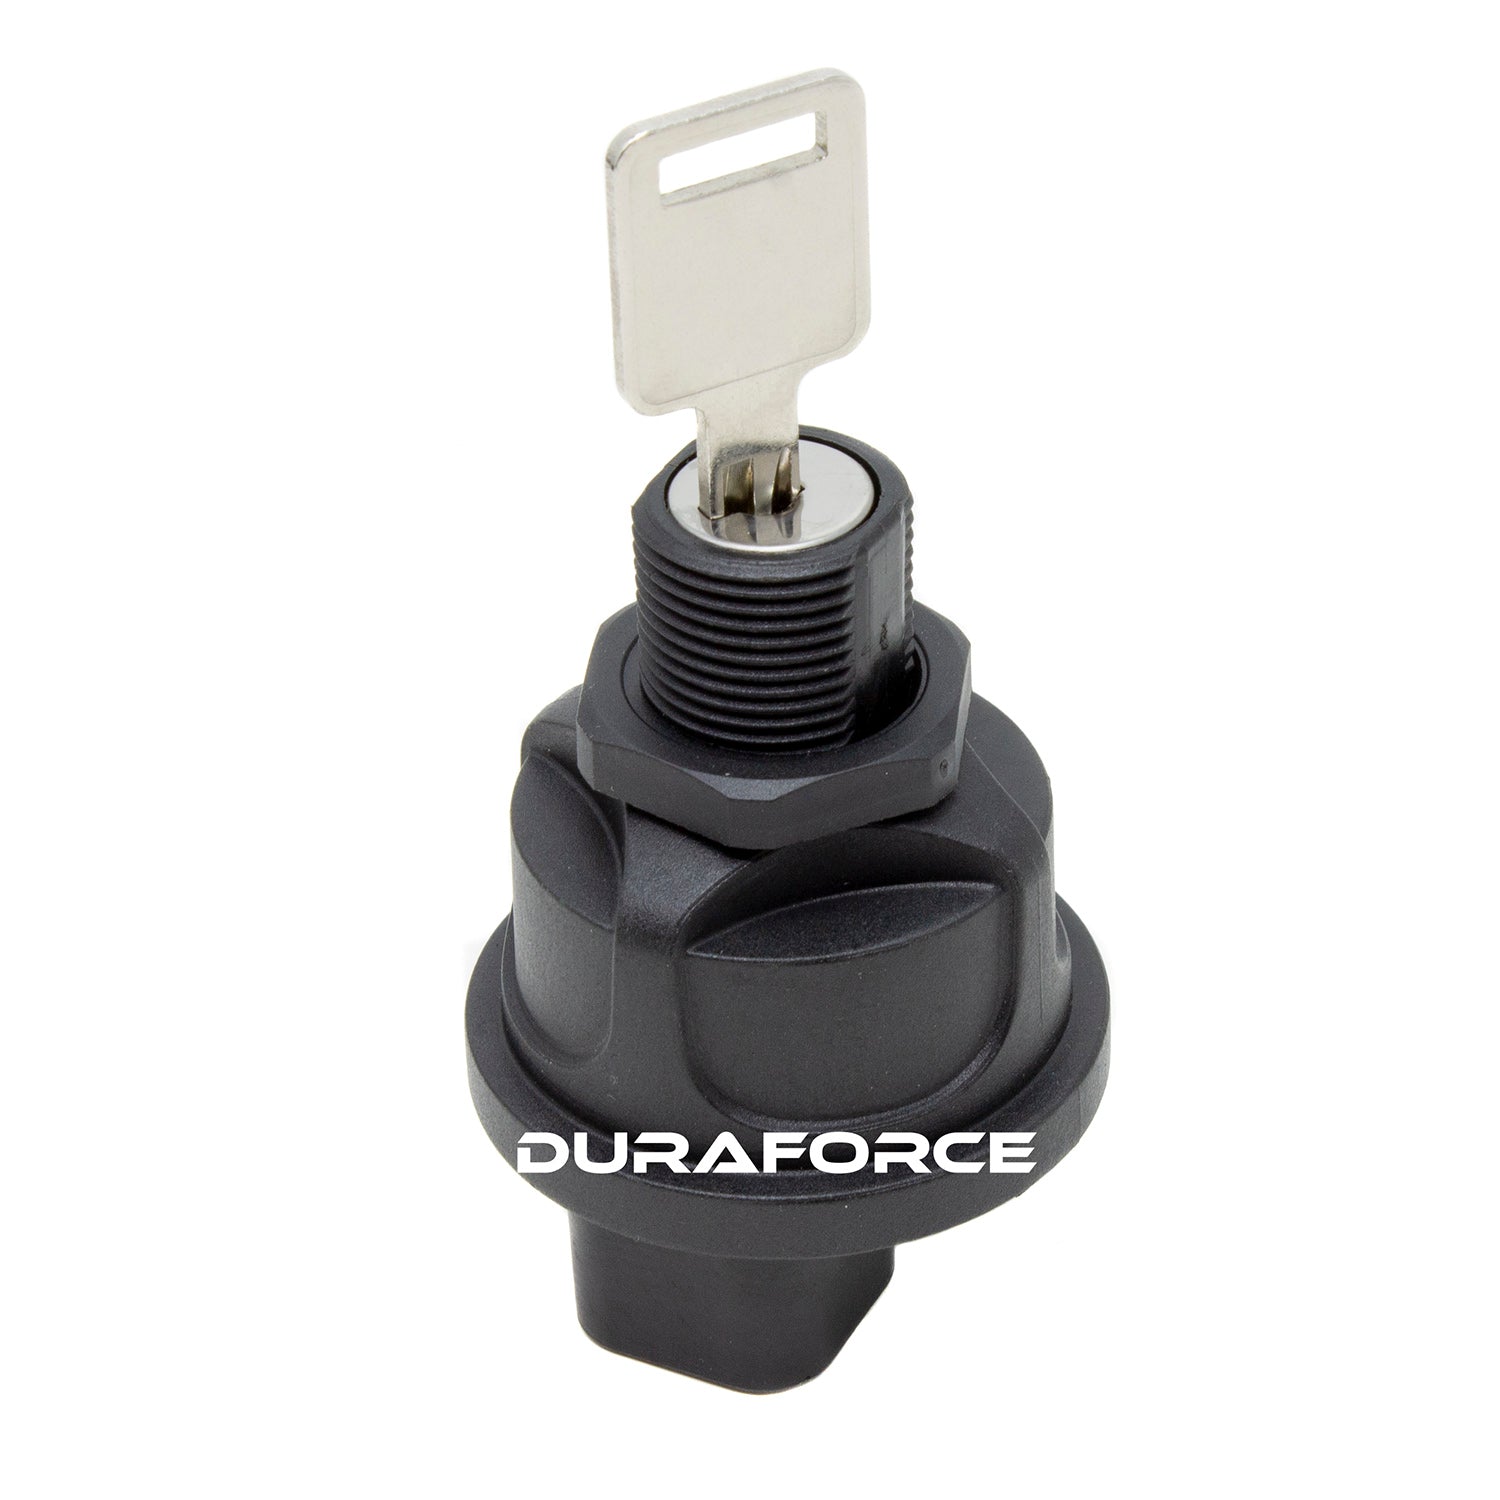 Duraforce 6693245, Ignition Switch For Bobcat